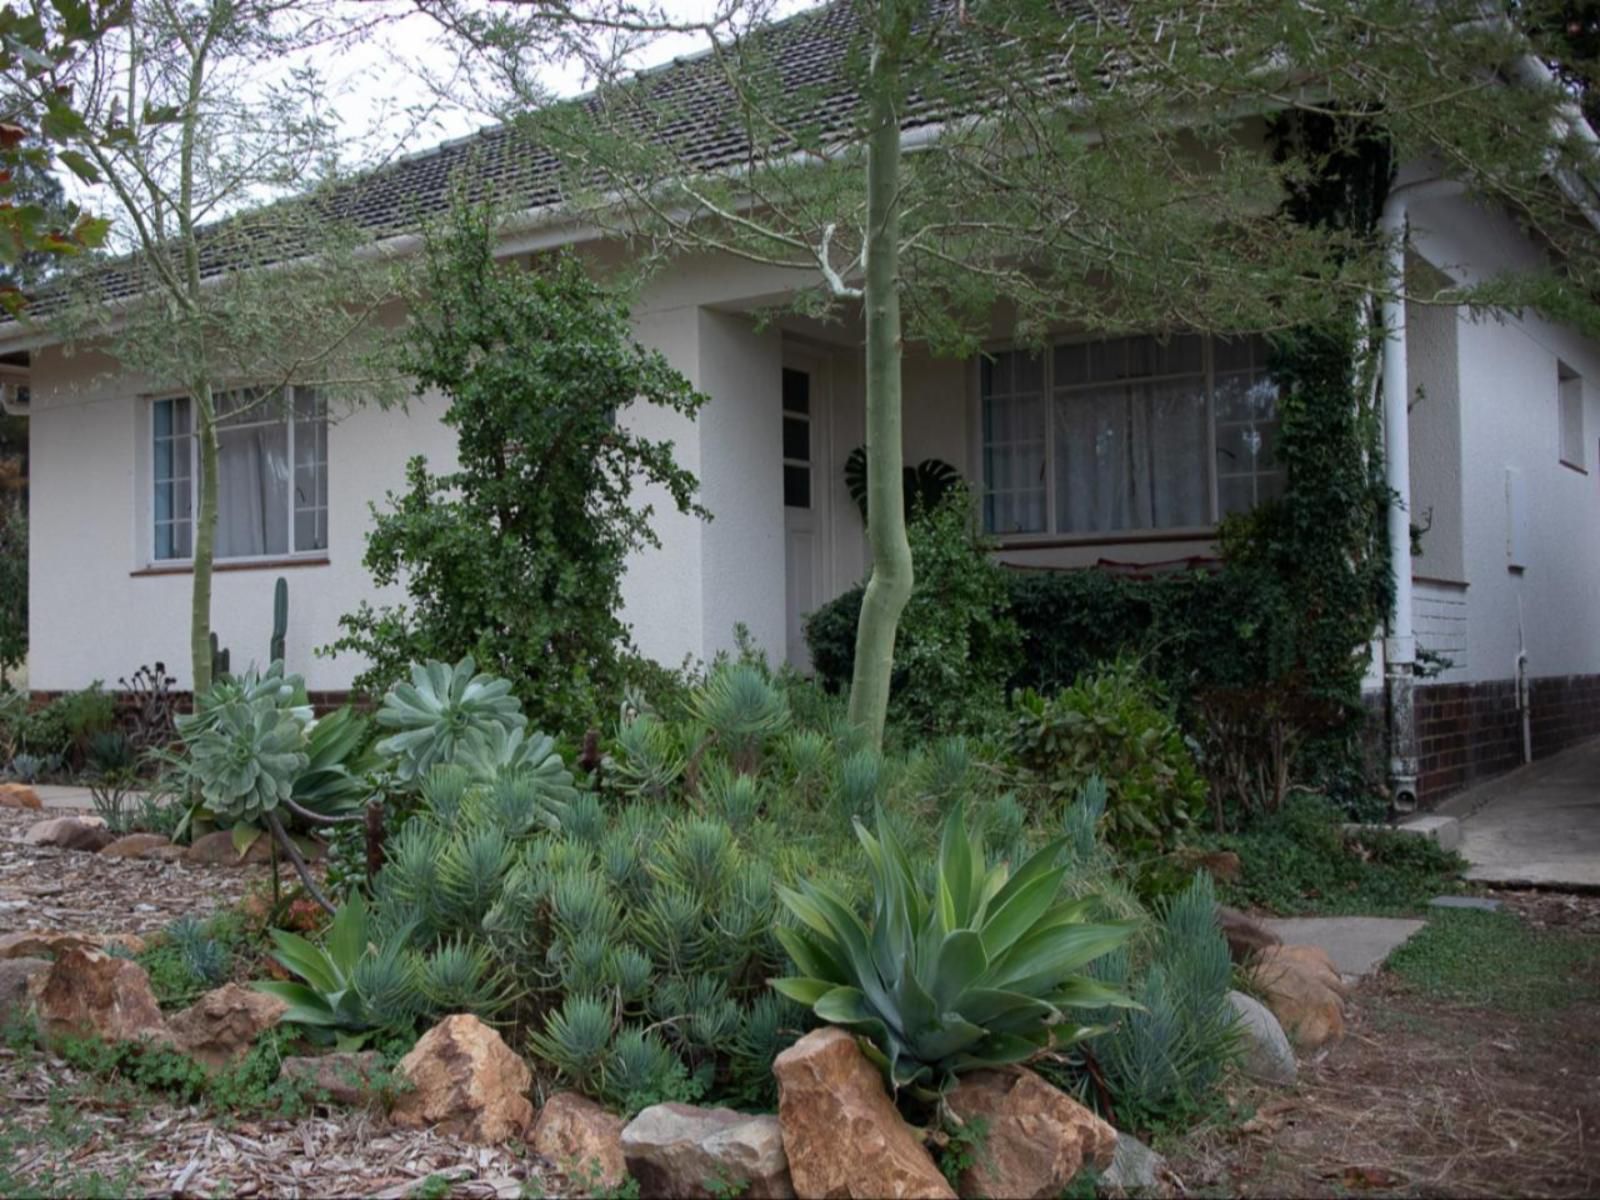 House 22 Tulbagh Western Cape South Africa House, Building, Architecture, Palm Tree, Plant, Nature, Wood, Garden